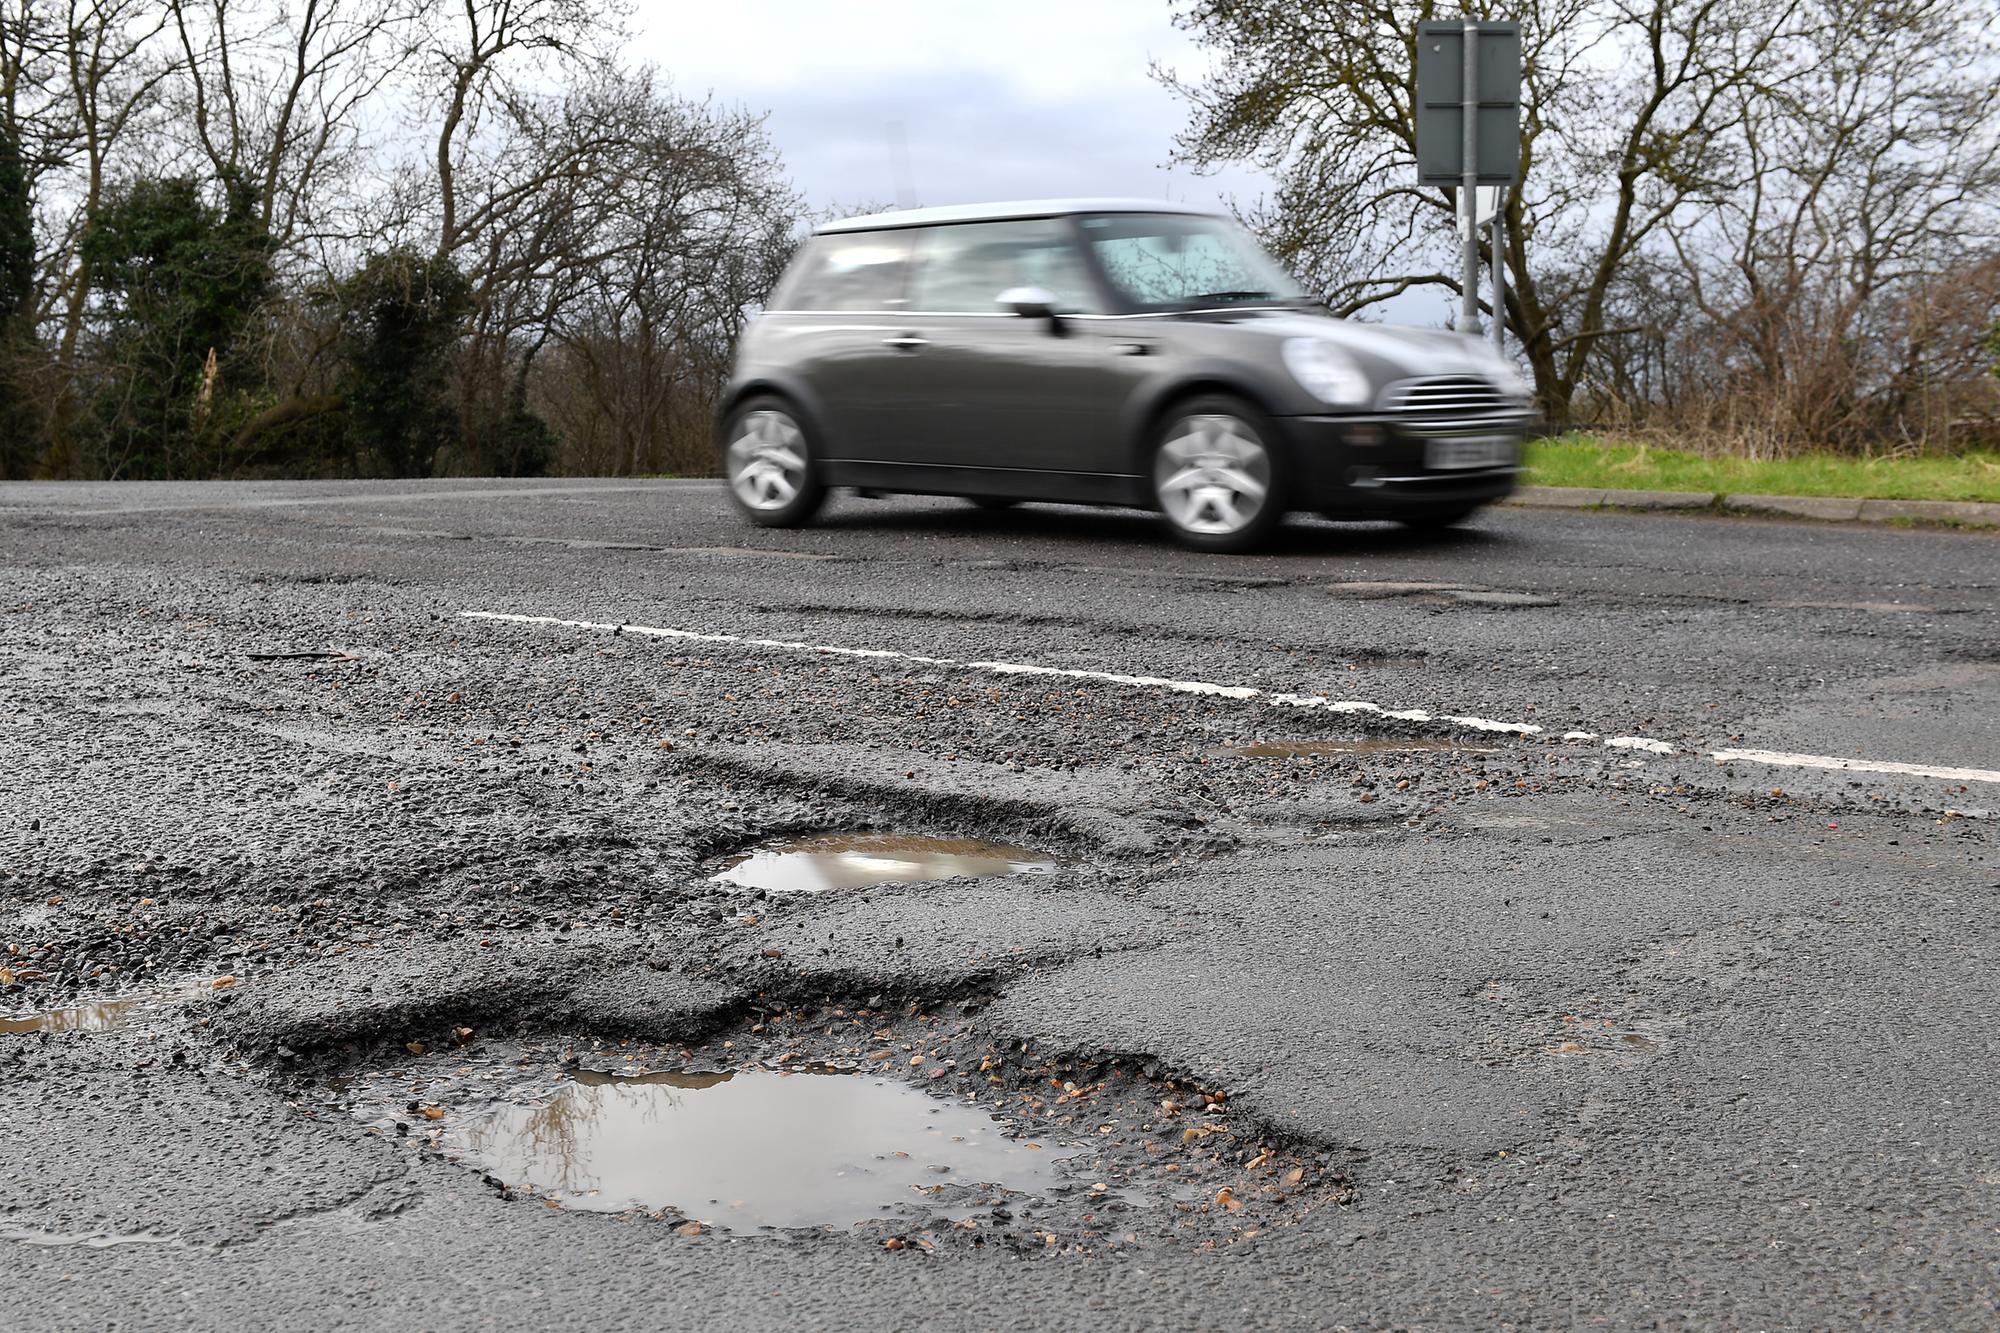 potholes, not air pollution, are the real problem with our roads - tom wood